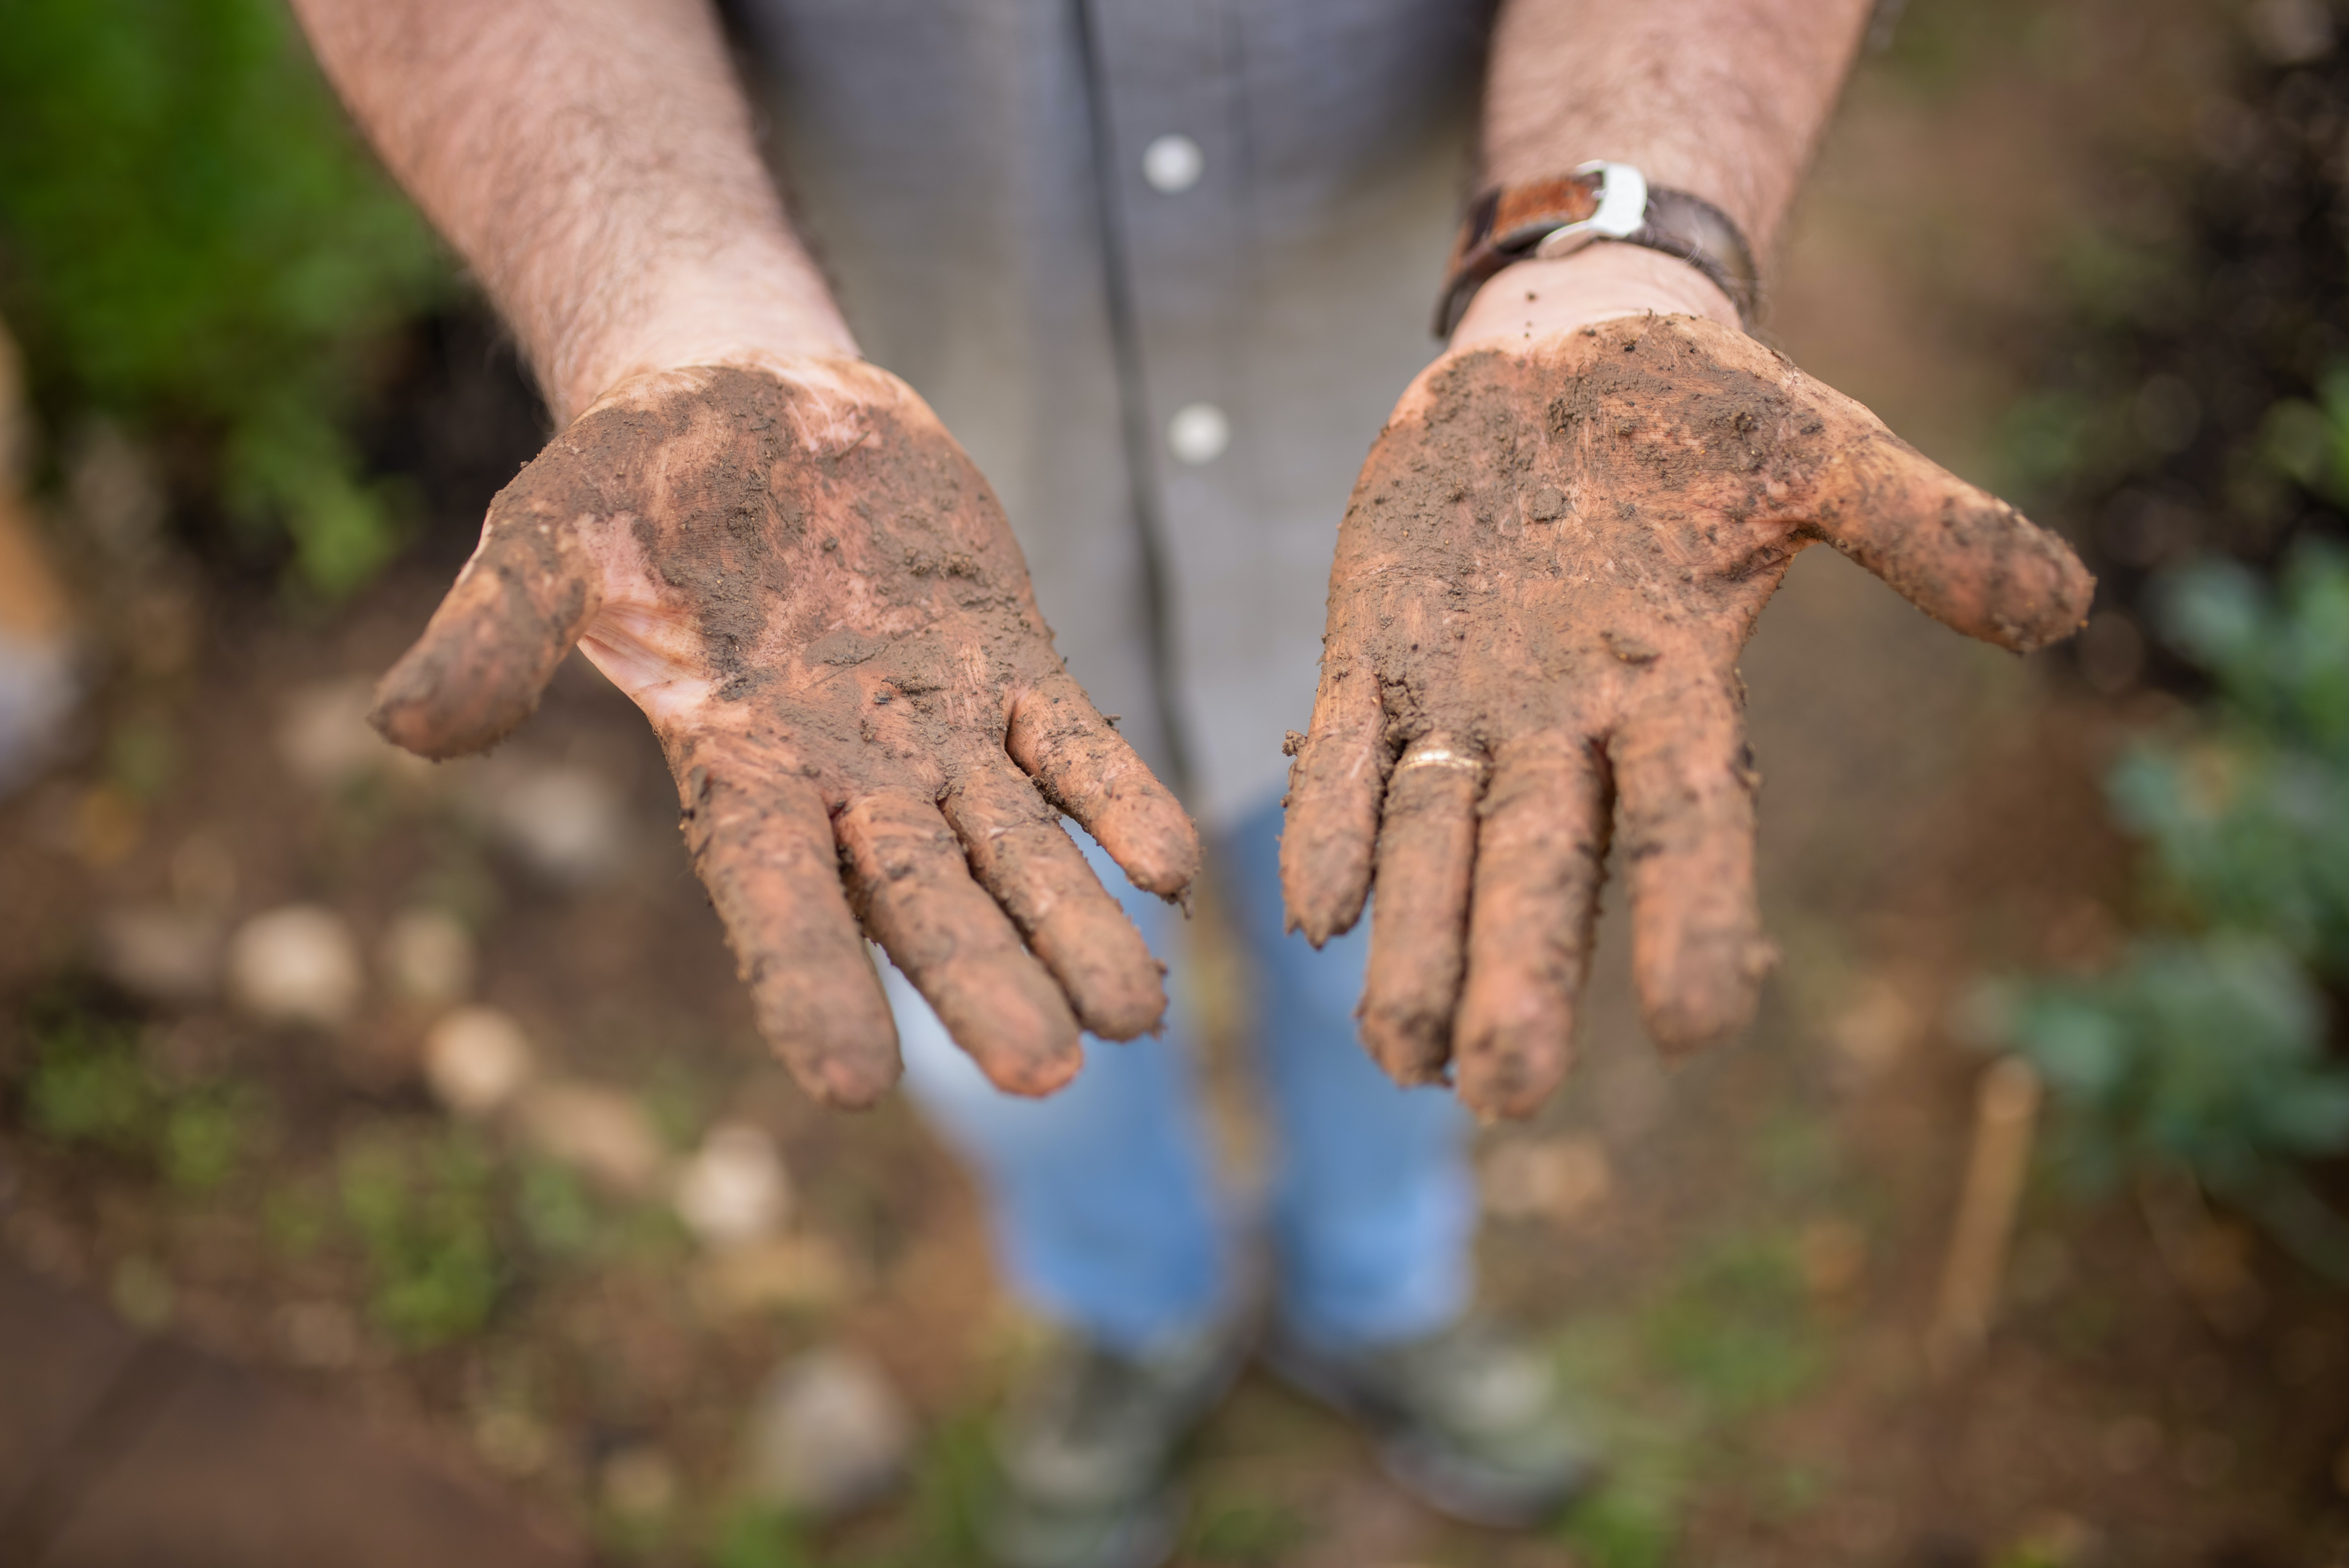 You can get your hands dirty when gardening